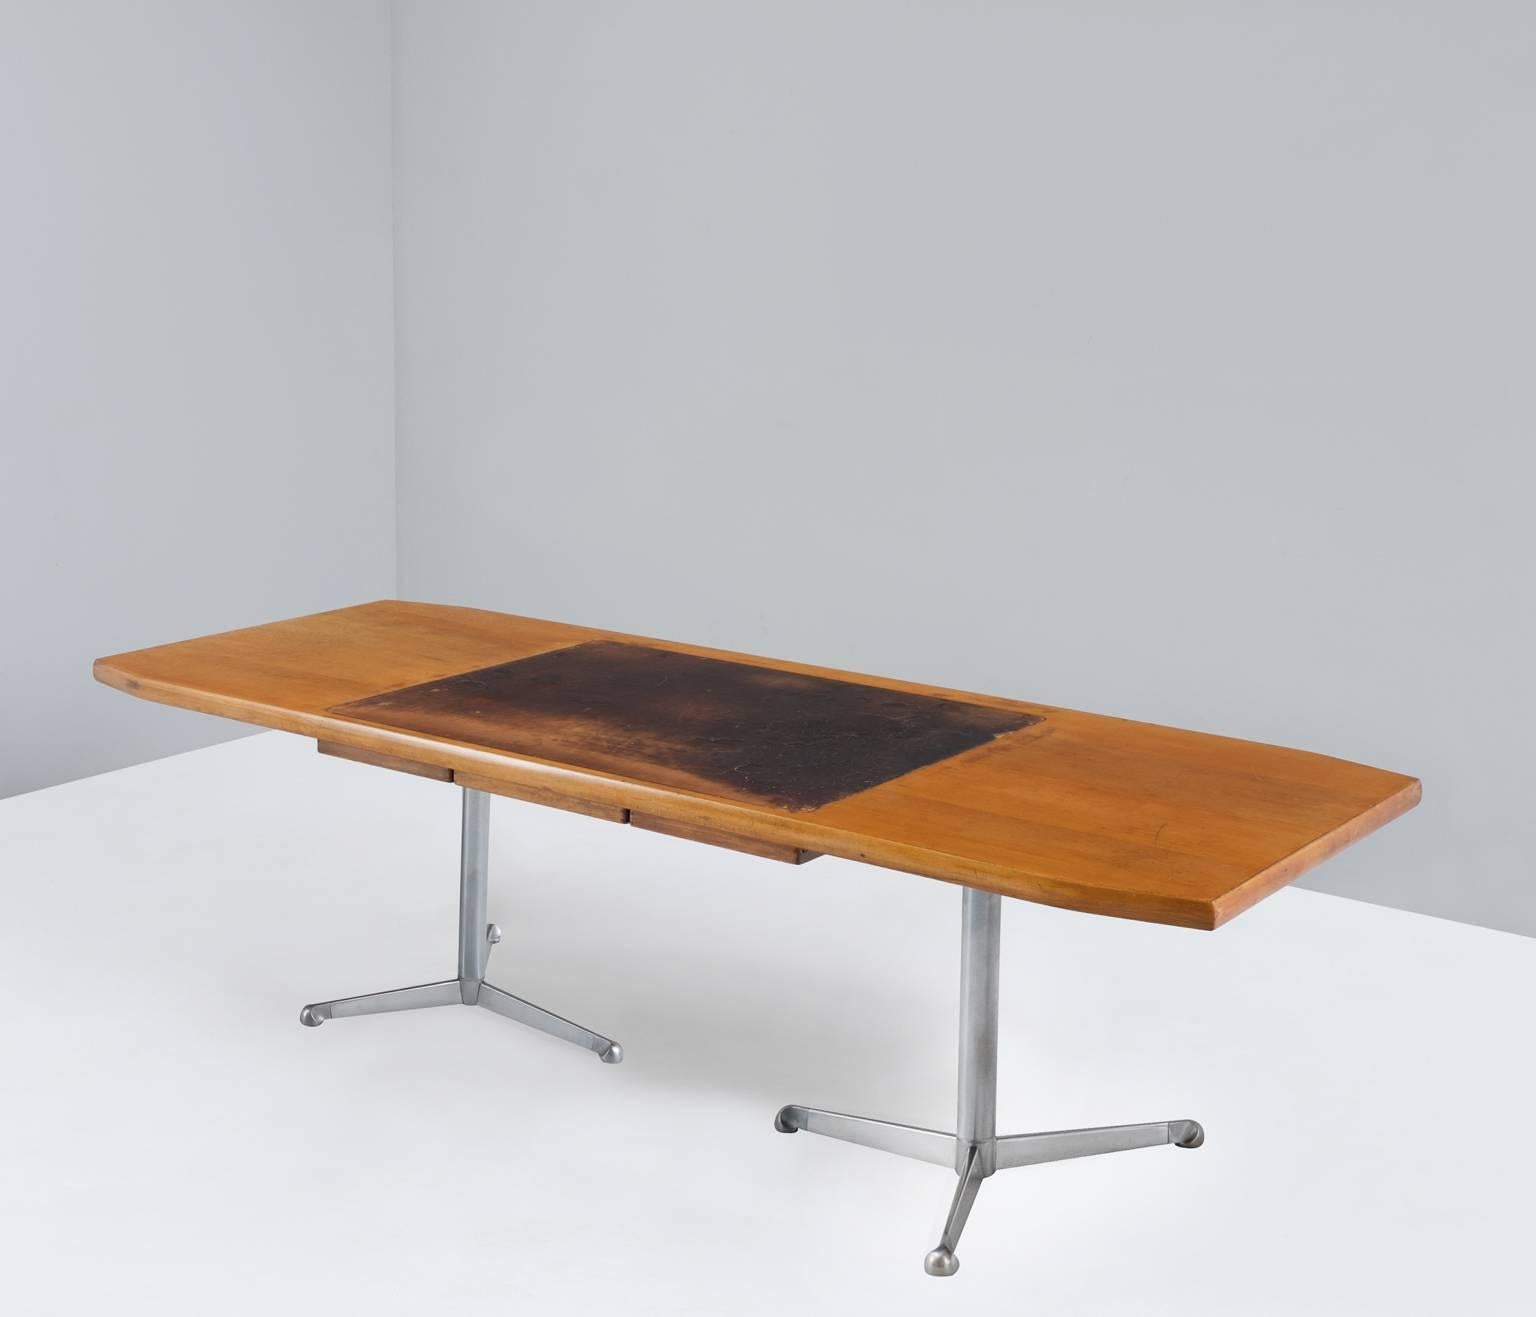 Beautiful Osvaldo Borsani writing desk with a gorgeous patinated leather writing area.

This table is equipped with two chromed tubular steel tripod feet which is a great contrast with the walnut top. The heavy tabletop conceals leather writing